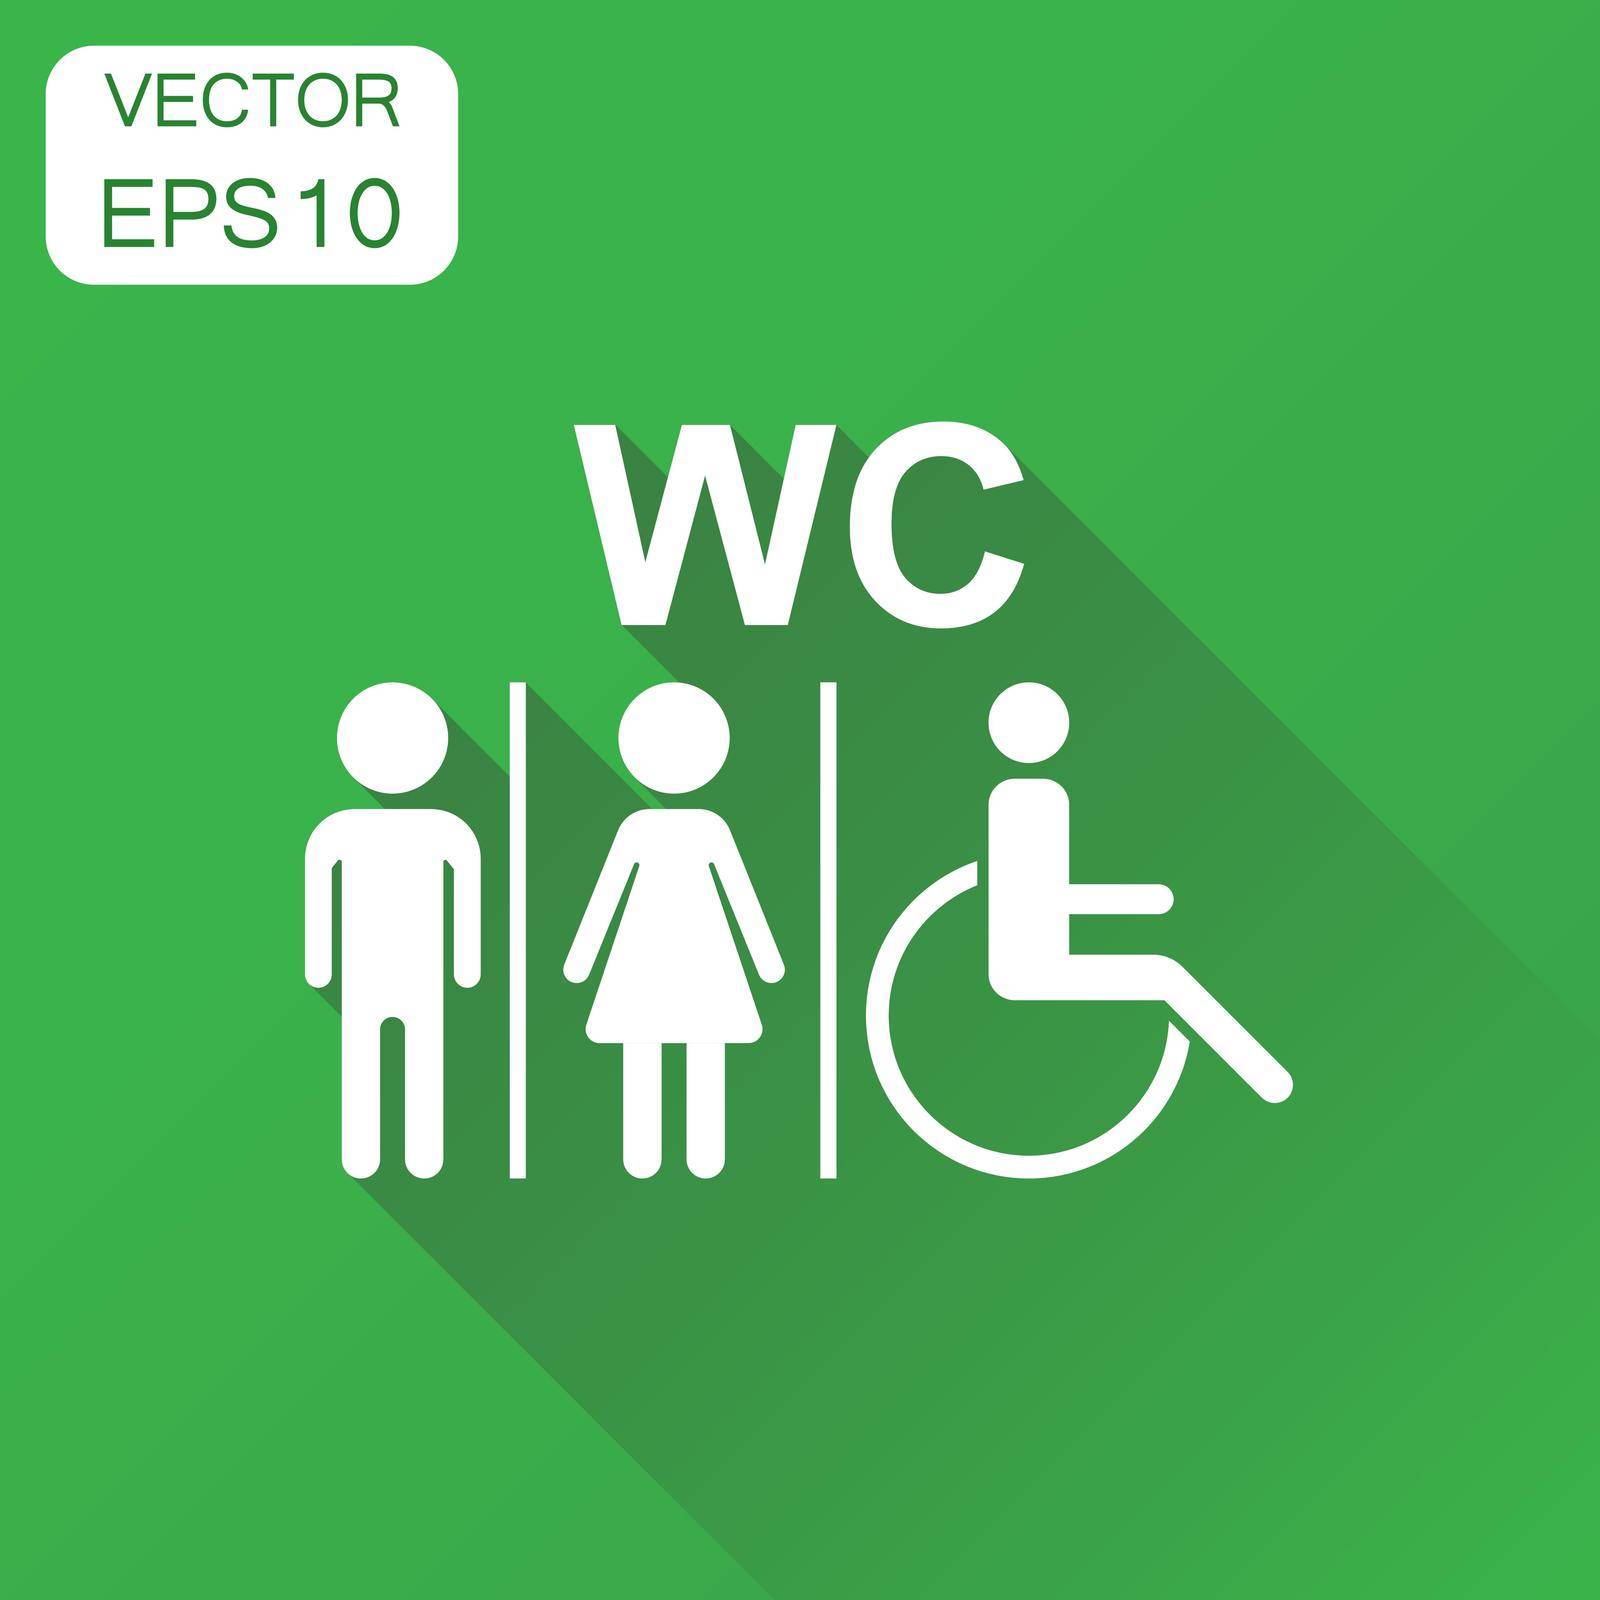 WC, toilet icon. Business concept men and women sign for restroom pictogram. Vector illustration on green background with long shadow. by LysenkoA